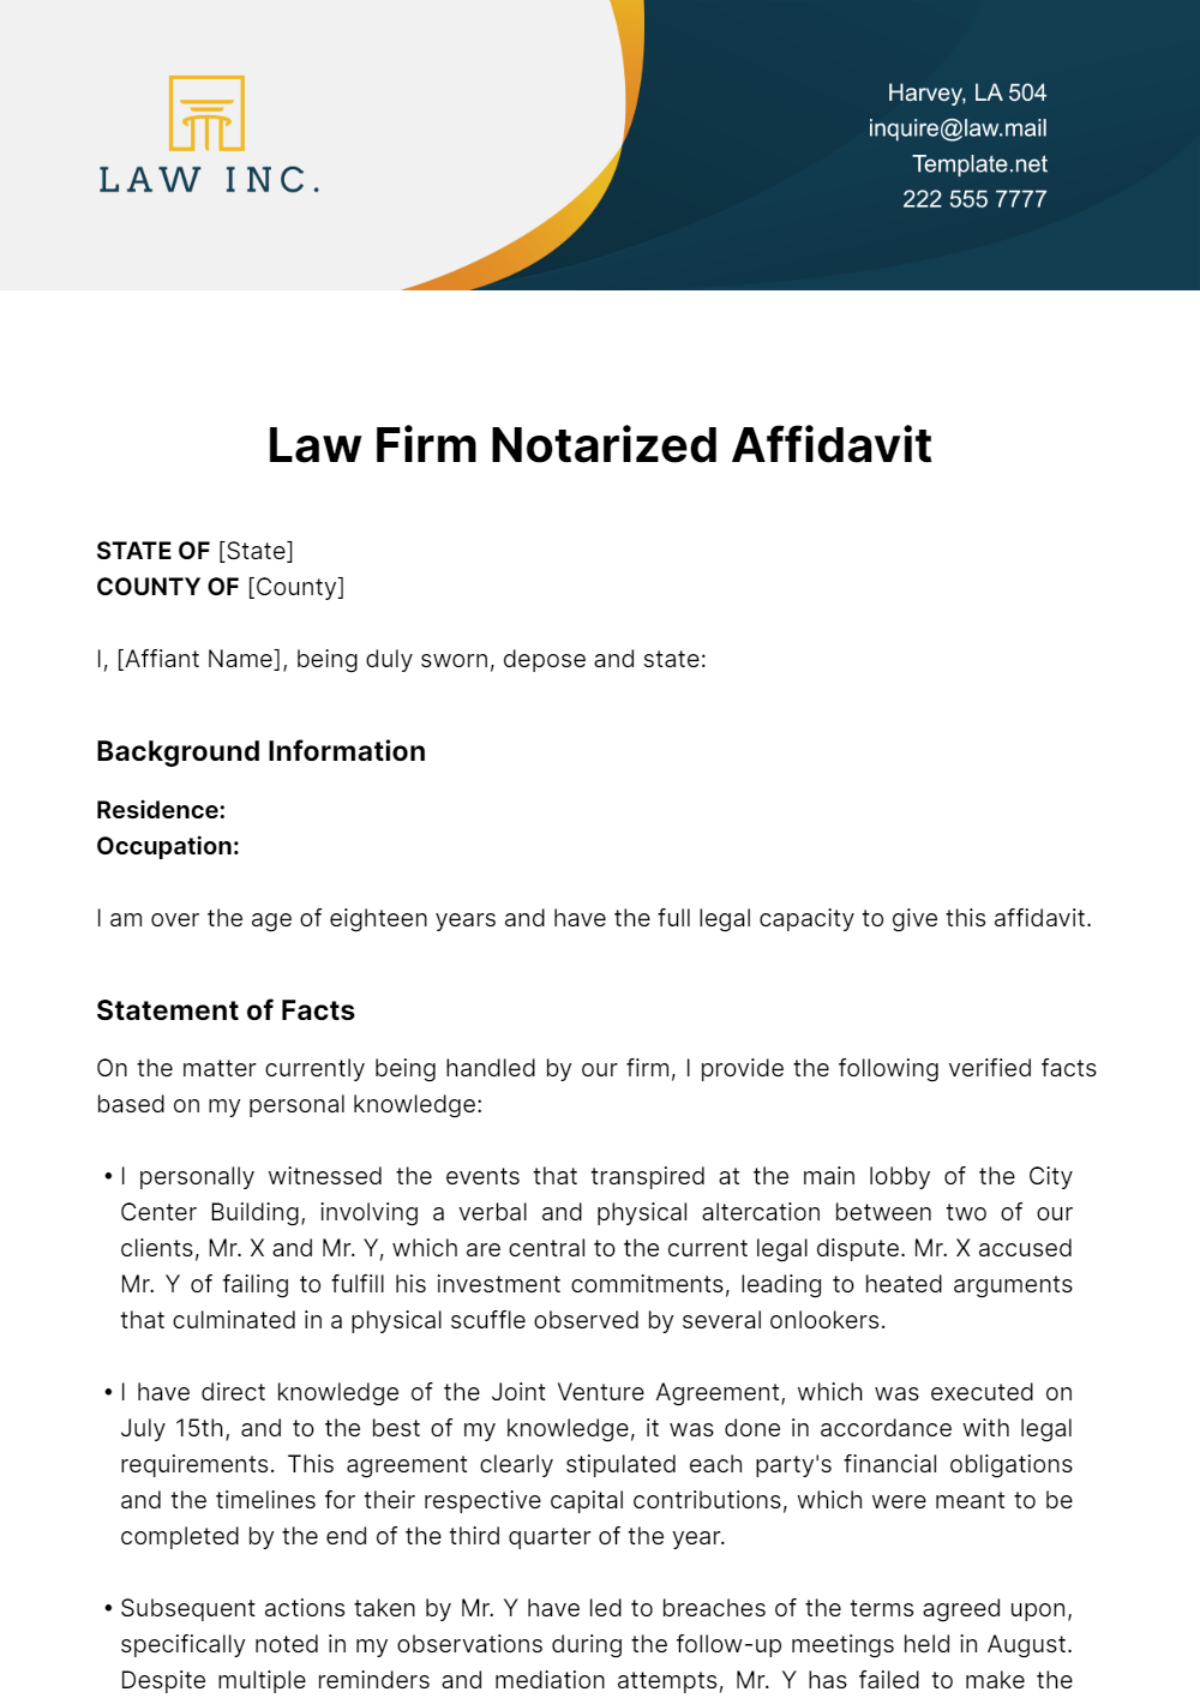 Law Firm Notarized Affidavit Template